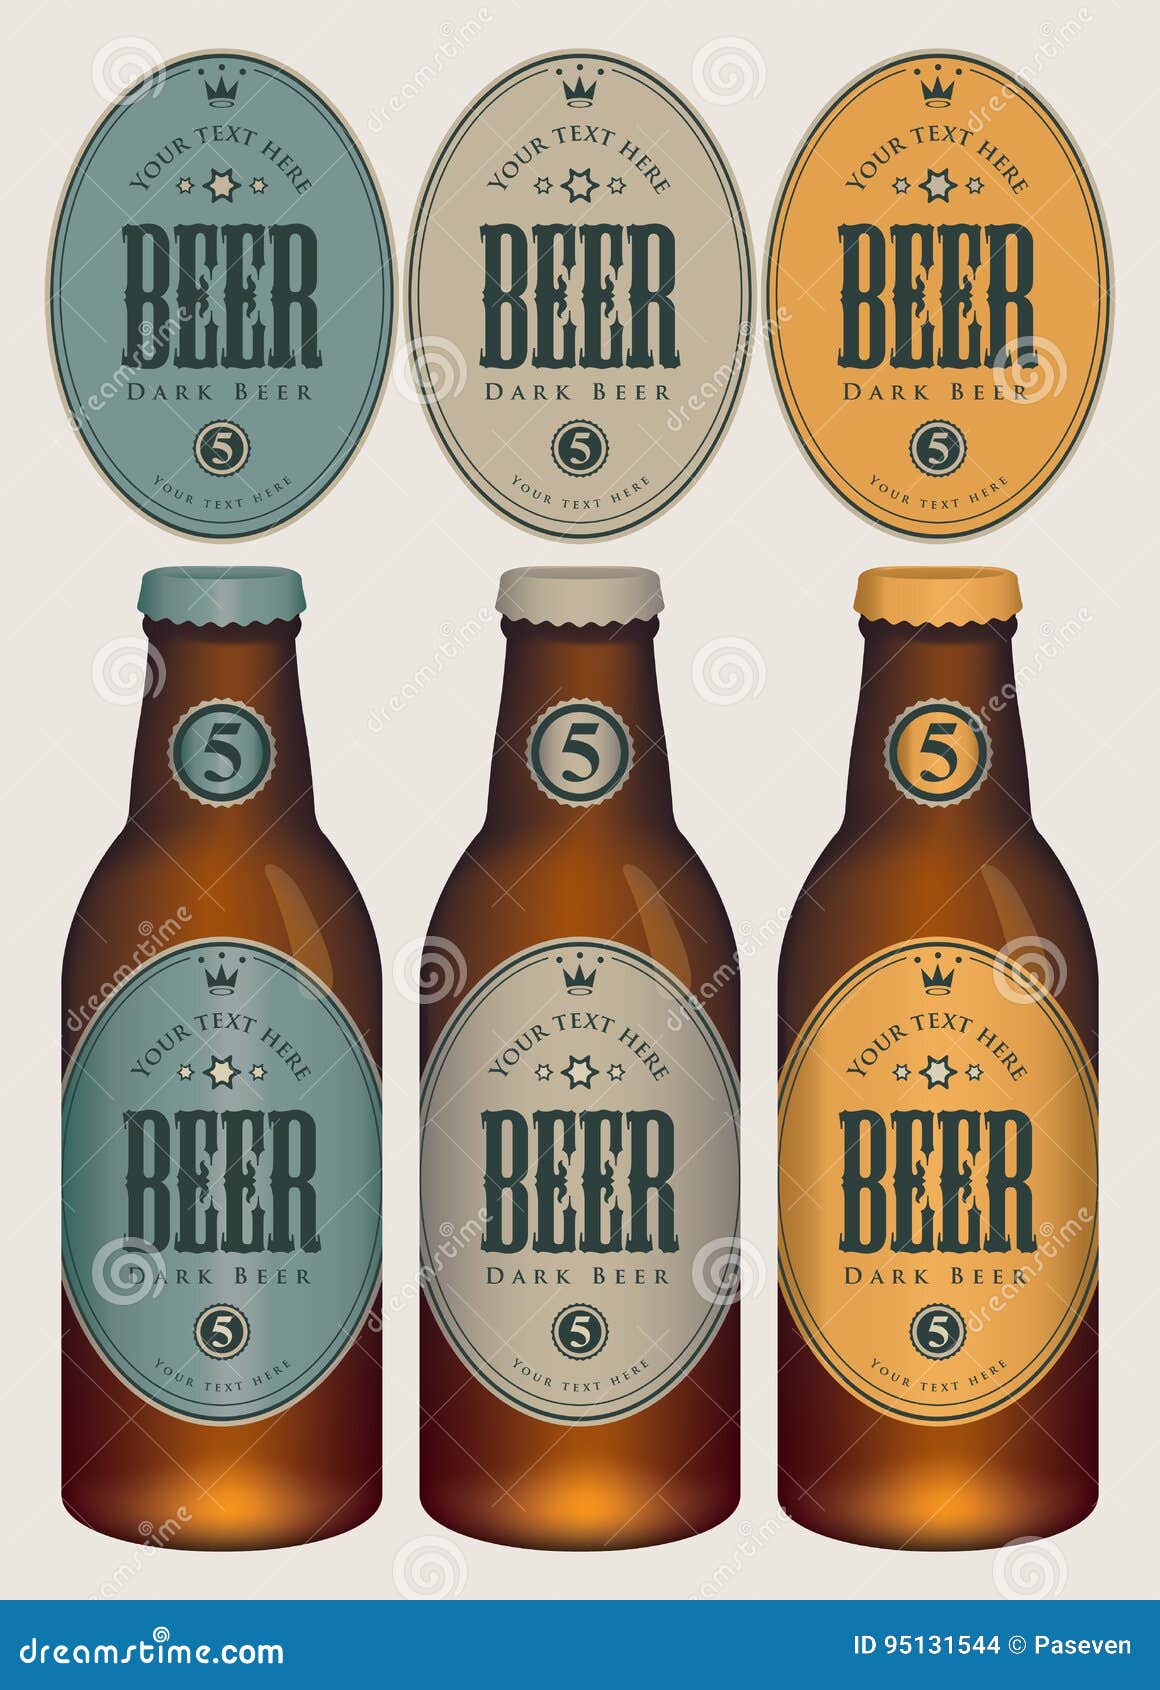 Beer Bottle Labels Template from thumbs.dreamstime.com